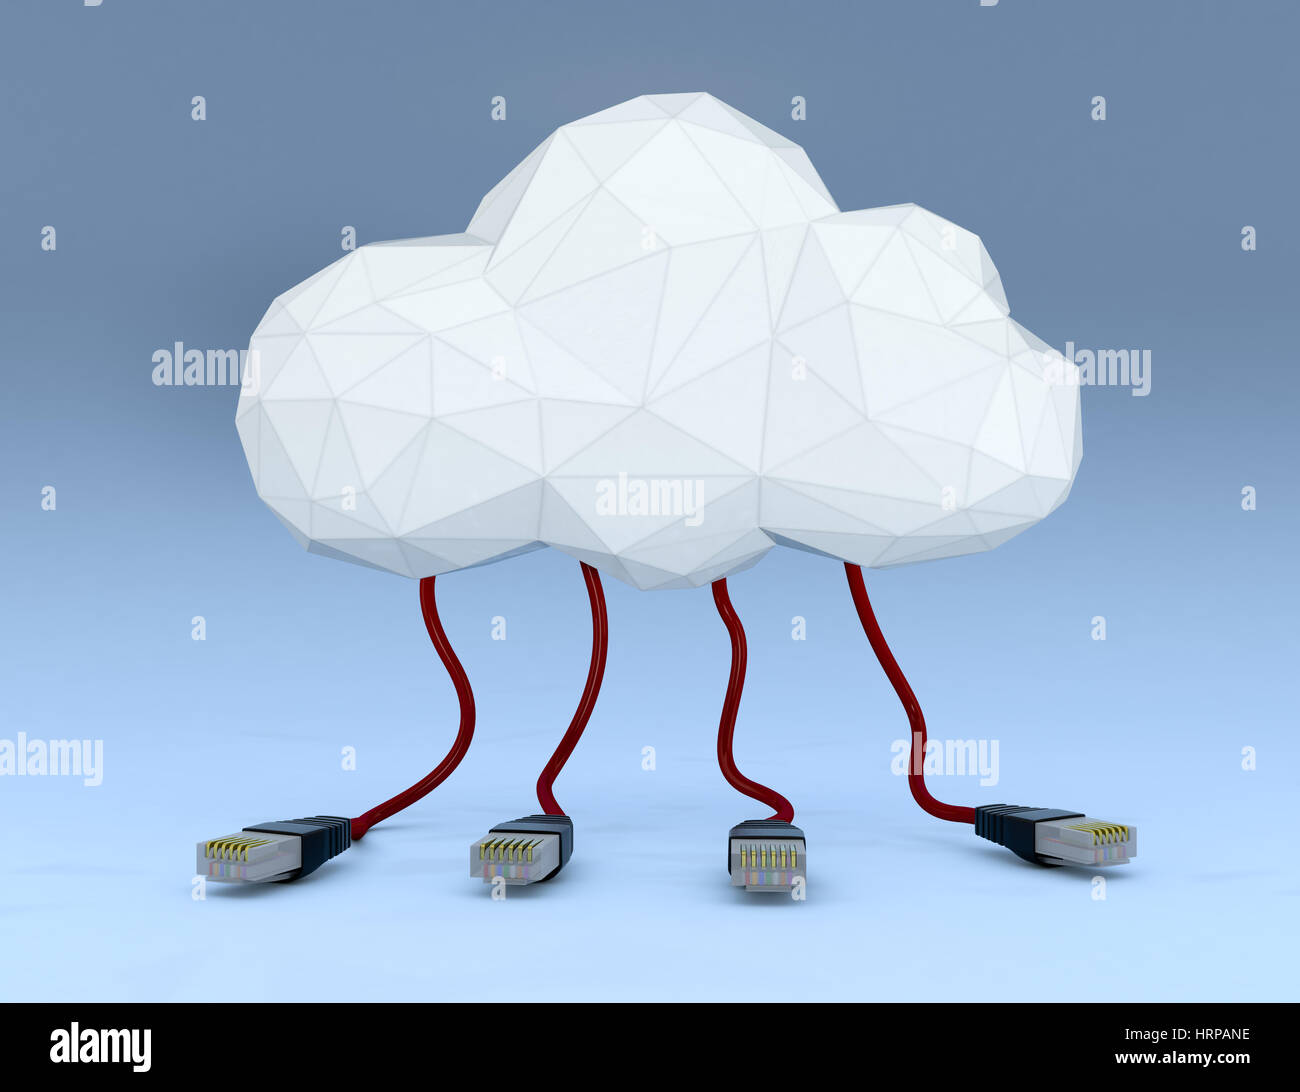 one stylized cloud made with the tecnique of lowpoly modeling, with network cables connected to it, blue background (3d render) Stock Photo